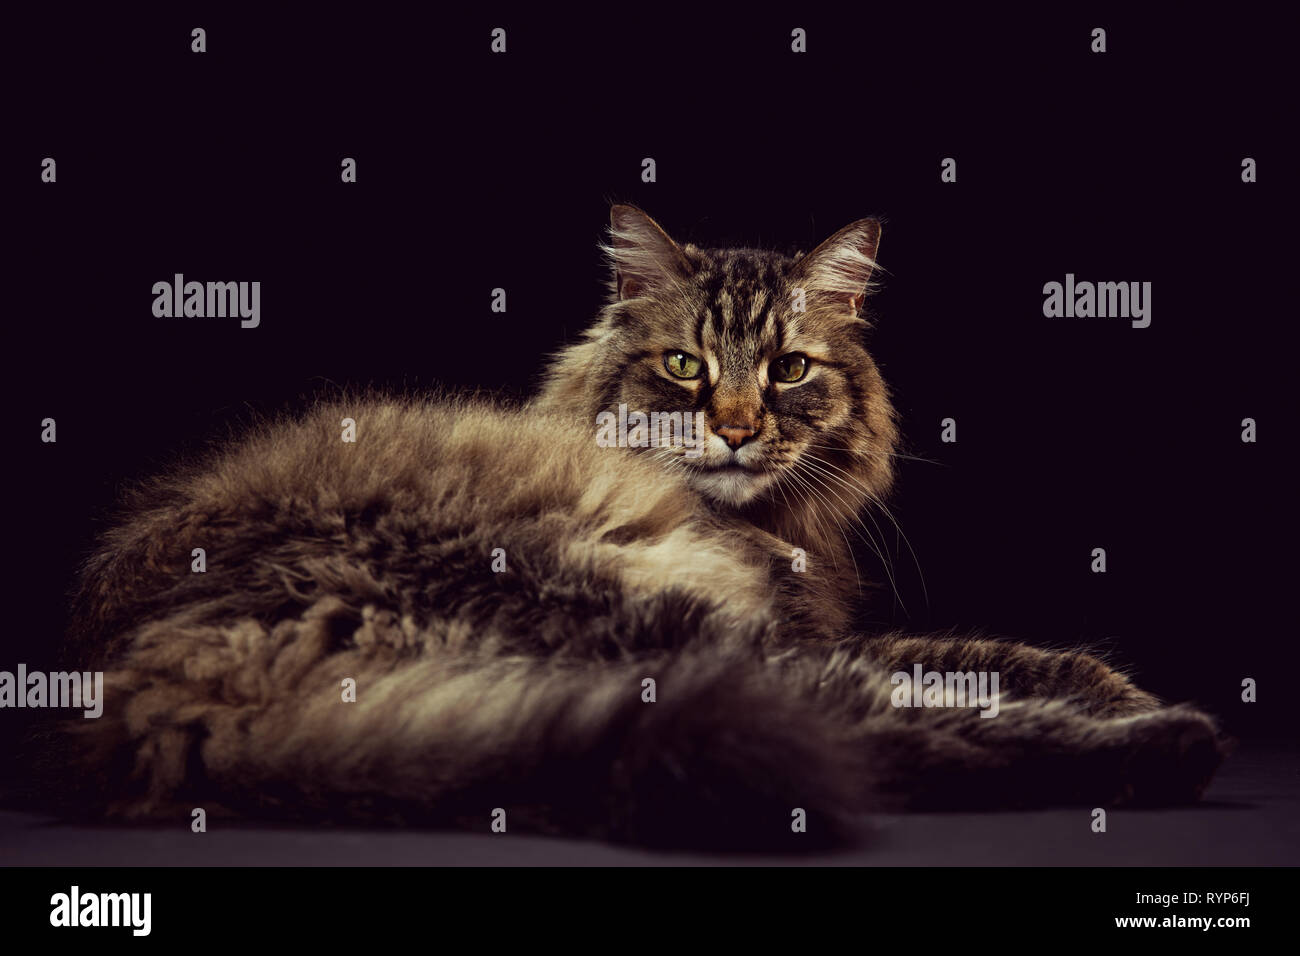 Full-body studio portrait of a brown tabby cat lying down on a black background and looking directly at camera. Stock Photo